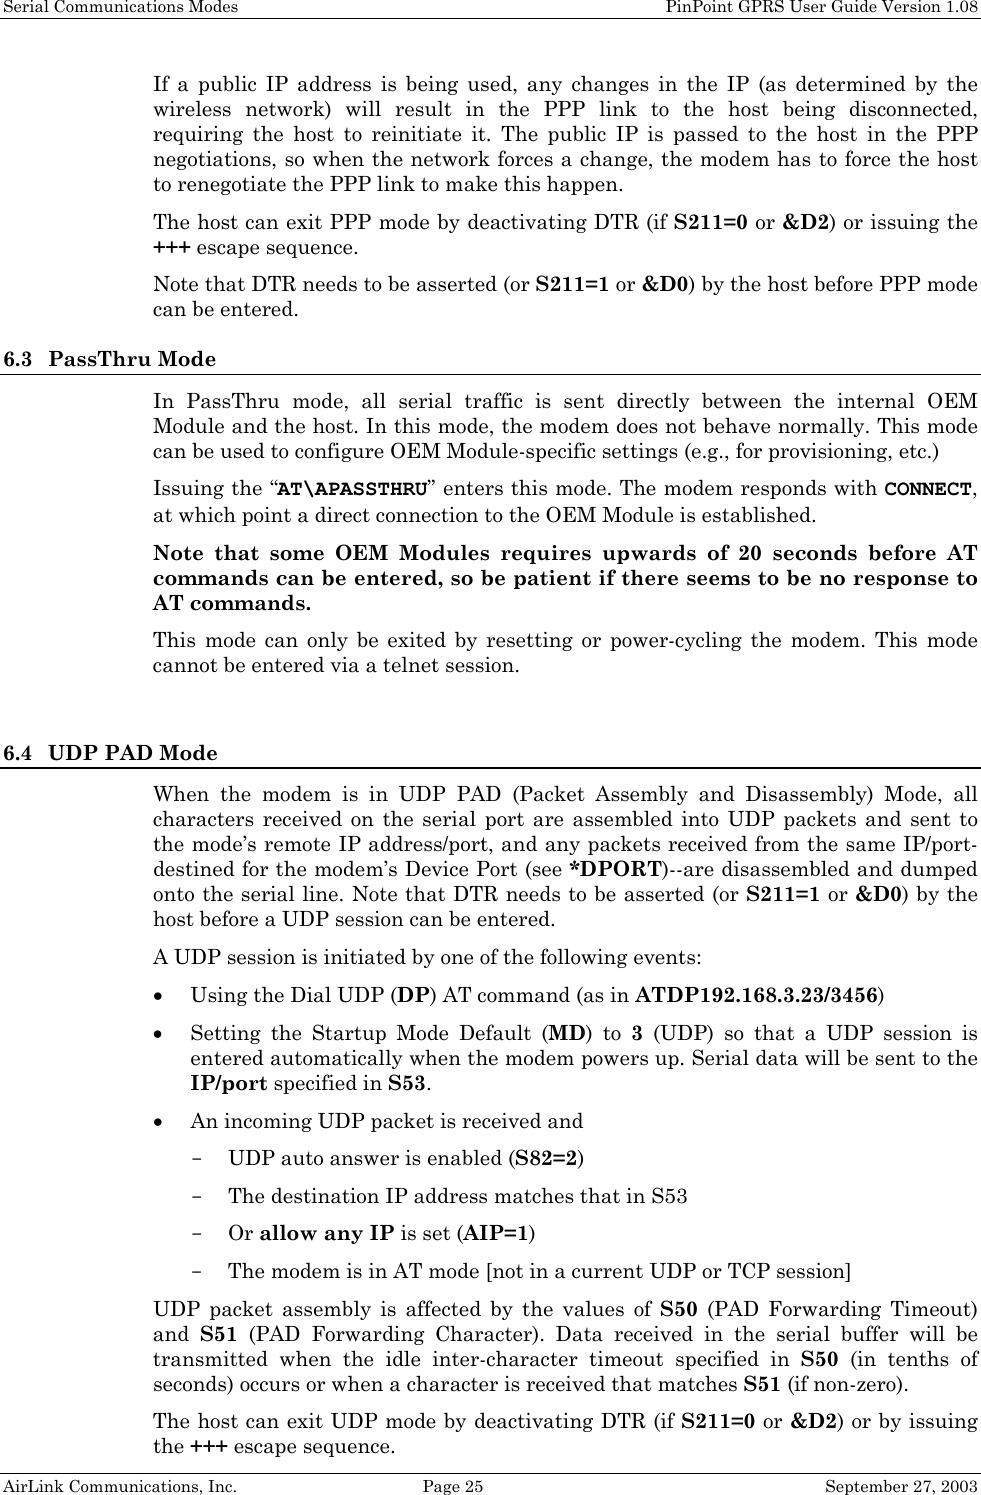 Serial Communications Modes    PinPoint GPRS User Guide Version 1.08 AirLink Communications, Inc.  Page 25  September 27, 2003 If a public IP address is being used, any changes in the IP (as determined by the wireless network) will result in the PPP link to the host being disconnected, requiring the host to reinitiate it. The public IP is passed to the host in the PPP negotiations, so when the network forces a change, the modem has to force the host to renegotiate the PPP link to make this happen. The host can exit PPP mode by deactivating DTR (if S211=0 or &amp;D2) or issuing the +++ escape sequence. Note that DTR needs to be asserted (or S211=1 or &amp;D0) by the host before PPP mode can be entered. 6.3 PassThru Mode In PassThru mode, all serial traffic is sent directly between the internal OEM Module and the host. In this mode, the modem does not behave normally. This mode can be used to configure OEM Module-specific settings (e.g., for provisioning, etc.) Issuing the “AT\APASSTHRU” enters this mode. The modem responds with CONNECT, at which point a direct connection to the OEM Module is established.  Note that some OEM Modules requires upwards of 20 seconds before AT commands can be entered, so be patient if there seems to be no response to AT commands. This mode can only be exited by resetting or power-cycling the modem. This mode cannot be entered via a telnet session.  6.4 UDP PAD Mode When the modem is in UDP PAD (Packet Assembly and Disassembly) Mode, all characters received on the serial port are assembled into UDP packets and sent to the mode’s remote IP address/port, and any packets received from the same IP/port-destined for the modem’s Device Port (see *DPORT)--are disassembled and dumped onto the serial line. Note that DTR needs to be asserted (or S211=1 or &amp;D0) by the host before a UDP session can be entered. A UDP session is initiated by one of the following events: • Using the Dial UDP (DP) AT command (as in ATDP192.168.3.23/3456) • Setting the Startup Mode Default (MD) to 3 (UDP) so that a UDP session is entered automatically when the modem powers up. Serial data will be sent to the IP/port specified in S53. • An incoming UDP packet is received and - UDP auto answer is enabled (S82=2) - The destination IP address matches that in S53 - Or allow any IP is set (AIP=1) - The modem is in AT mode [not in a current UDP or TCP session] UDP packet assembly is affected by the values of S50 (PAD Forwarding Timeout) and  S51 (PAD Forwarding Character). Data received in the serial buffer will be transmitted when the idle inter-character timeout specified in S50 (in tenths of seconds) occurs or when a character is received that matches S51 (if non-zero). The host can exit UDP mode by deactivating DTR (if S211=0 or &amp;D2) or by issuing the +++ escape sequence. 